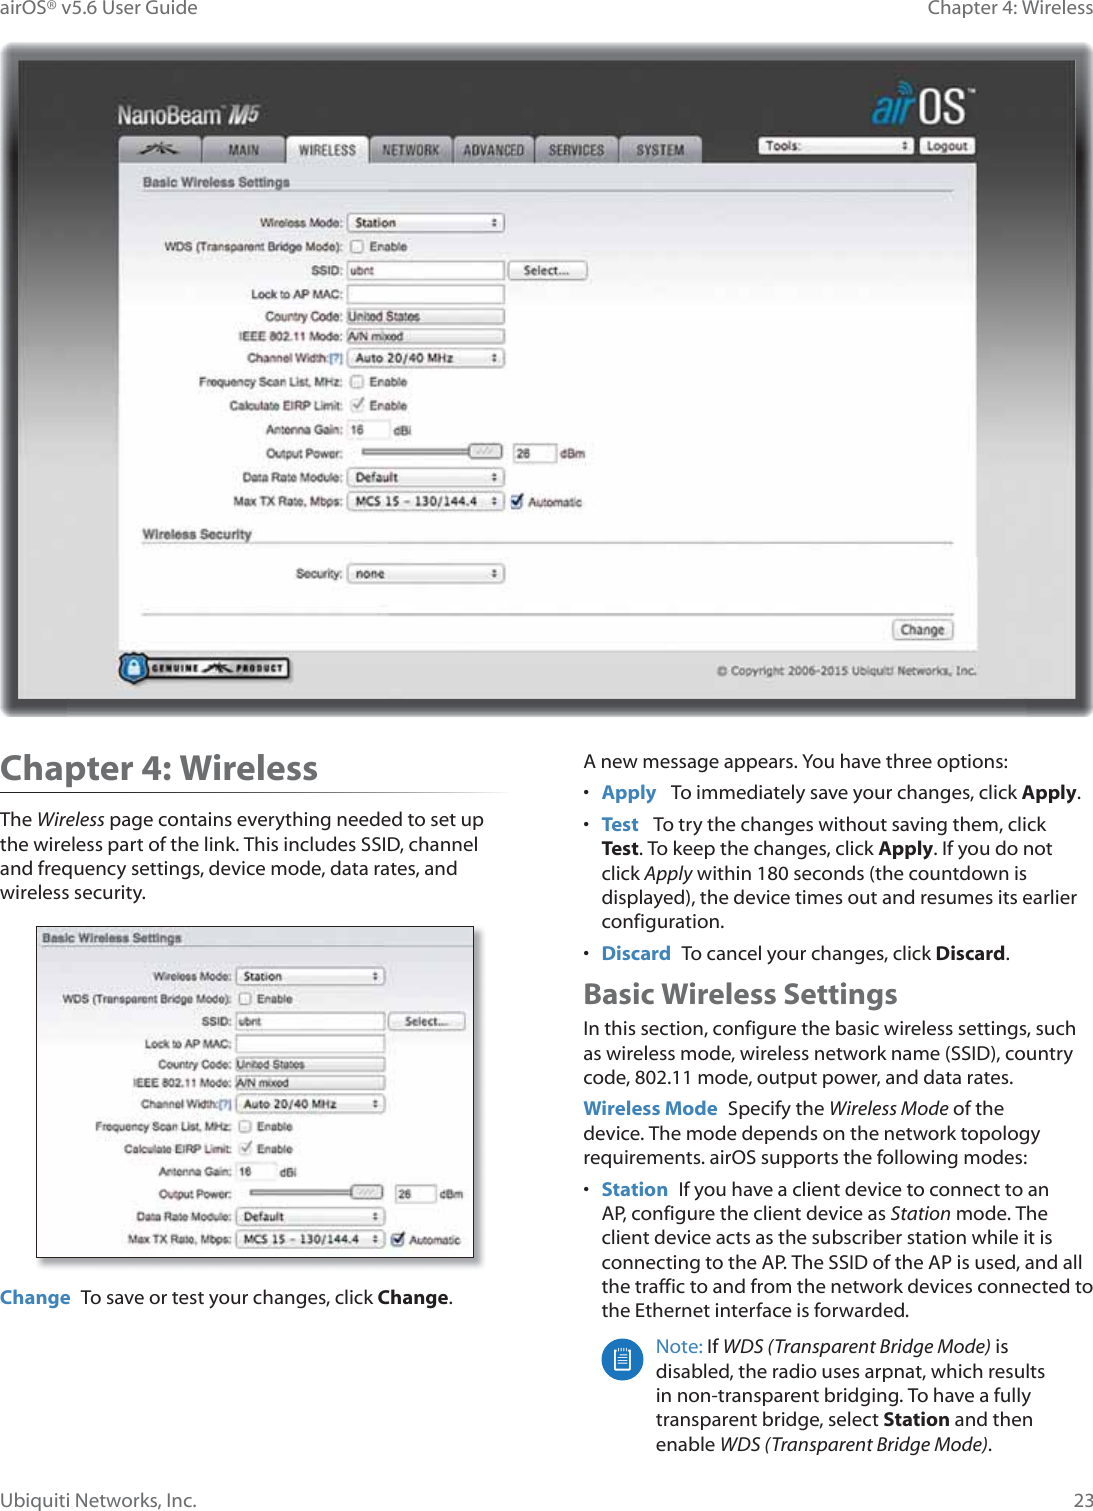 23Chapter 4: WirelessairOS® v5.6 User GuideUbiquiti Networks, Inc.Chapter 4: WirelessThe Wireless page contains everything needed to set up the wireless part of the link. This includes SSID, channel and frequency settings, device mode, data rates, and wireless security.Change  To save or test your changes, click Change.A new message appears. You have three options:•  Apply   To immediately save your changes, click Apply.•  Test   To try the changes without saving them, click Test. To keep the changes, click Apply. If you do not click Apply within 180 seconds (the countdown is displayed), the device times out and resumes its earlier configuration.•  Discard  To cancel your changes, click Discard.Basic Wireless SettingsIn this section, configure the basic wireless settings, such as wireless mode, wireless network name (SSID), country code, 802.11 mode, output power, and data rates.Wireless Mode  Specify the Wireless Mode of the device. The mode depends on the network topology requirements. airOS supports the following modes:•  Station  If you have a client device to connect to an AP, configure the client device as Station mode. The client device acts as the subscriber station while it is connecting to the AP. The SSID of the AP is used, and all the traffic to and from the network devices connected to the Ethernet interface is forwarded.Note: If WDS (Transparent Bridge Mode) is disabled, the radio uses arpnat, which results in non-transparent bridging. To have a fully transparent bridge, select Station and then enable WDS (Transparent Bridge Mode). 